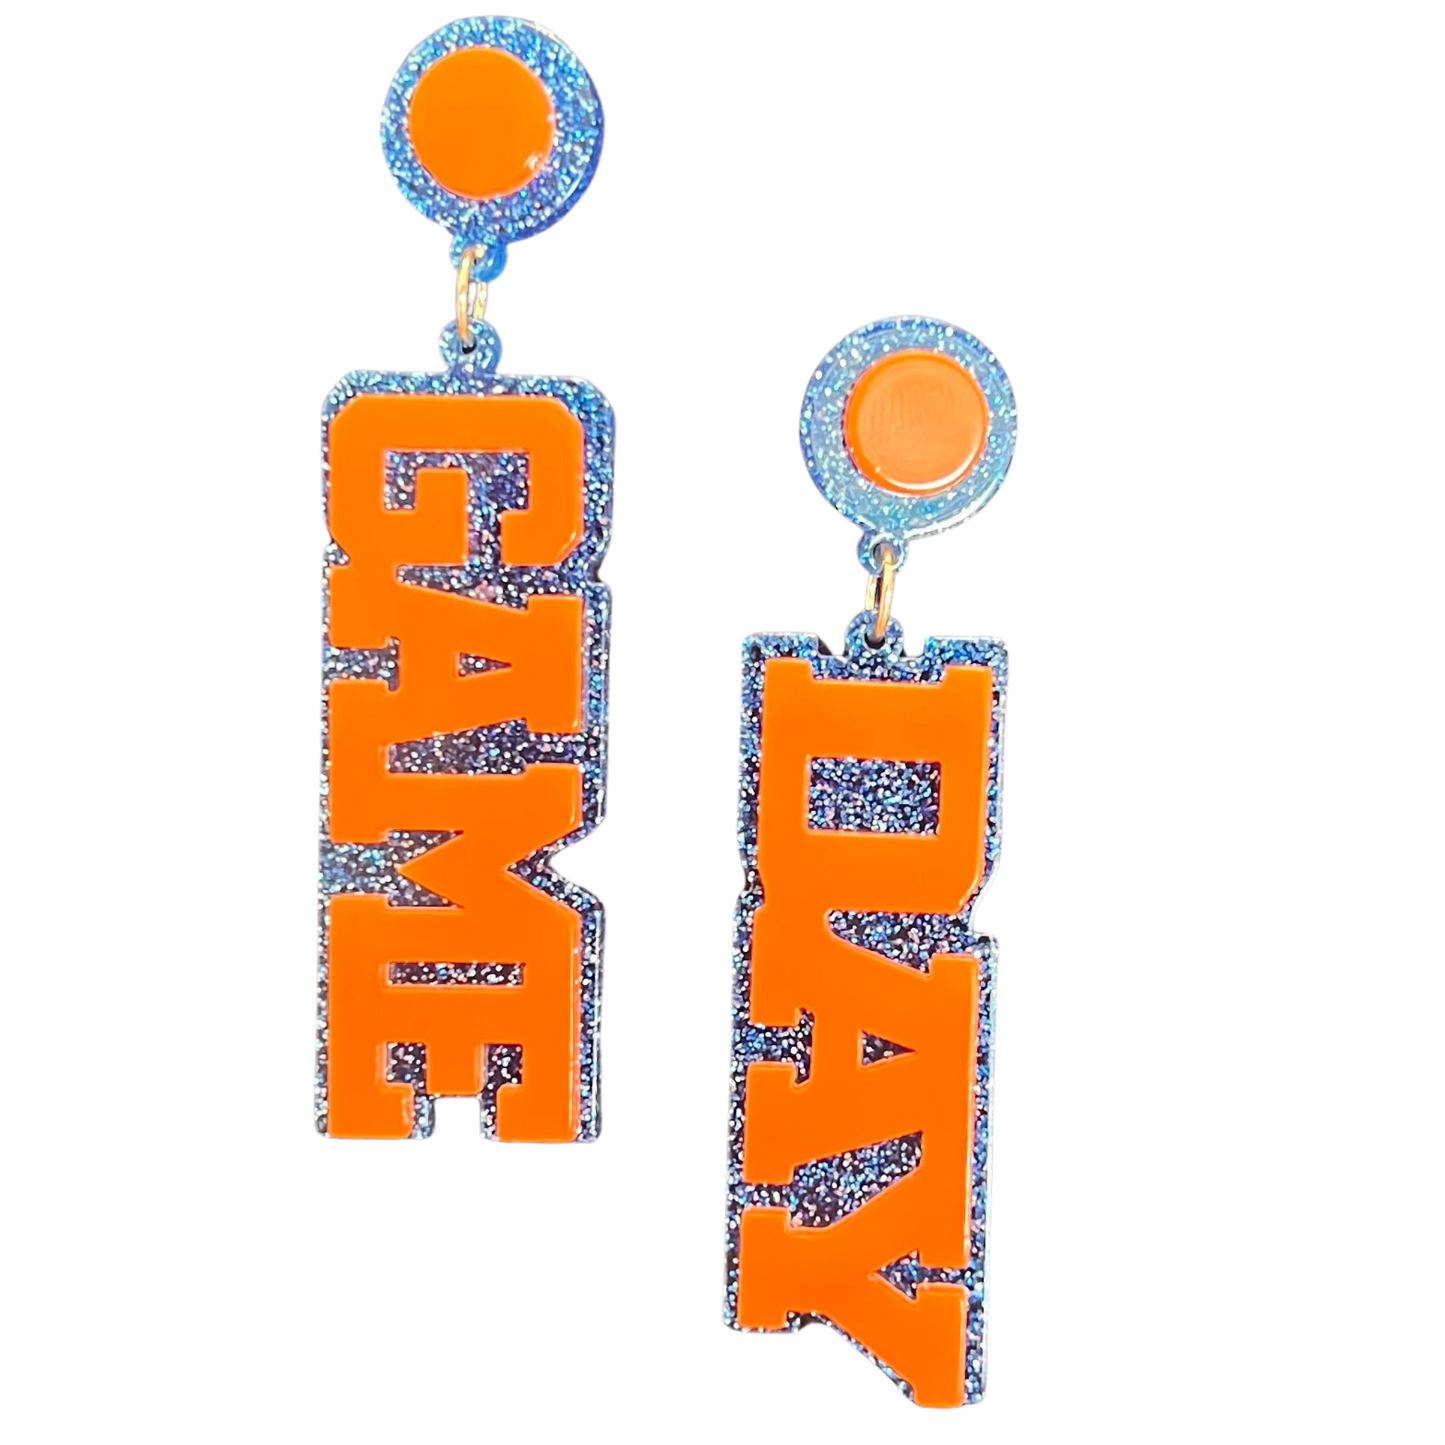 game day acrylic earrings in orange and blue